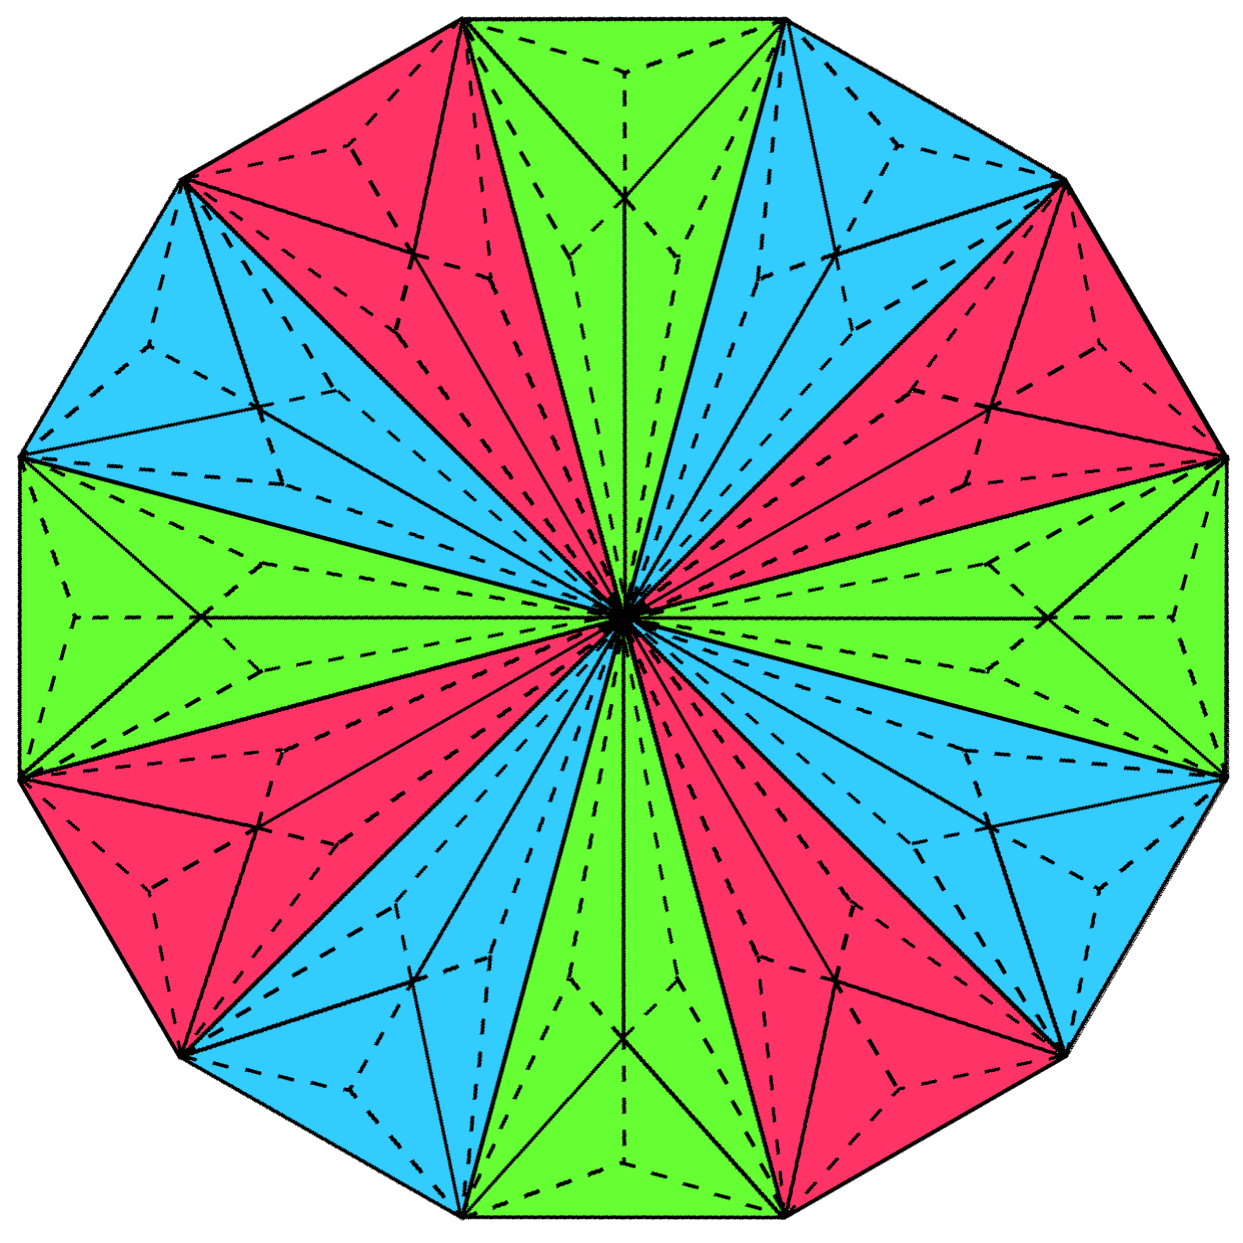 336 geometrical elements surround centre of Type C dodecagon